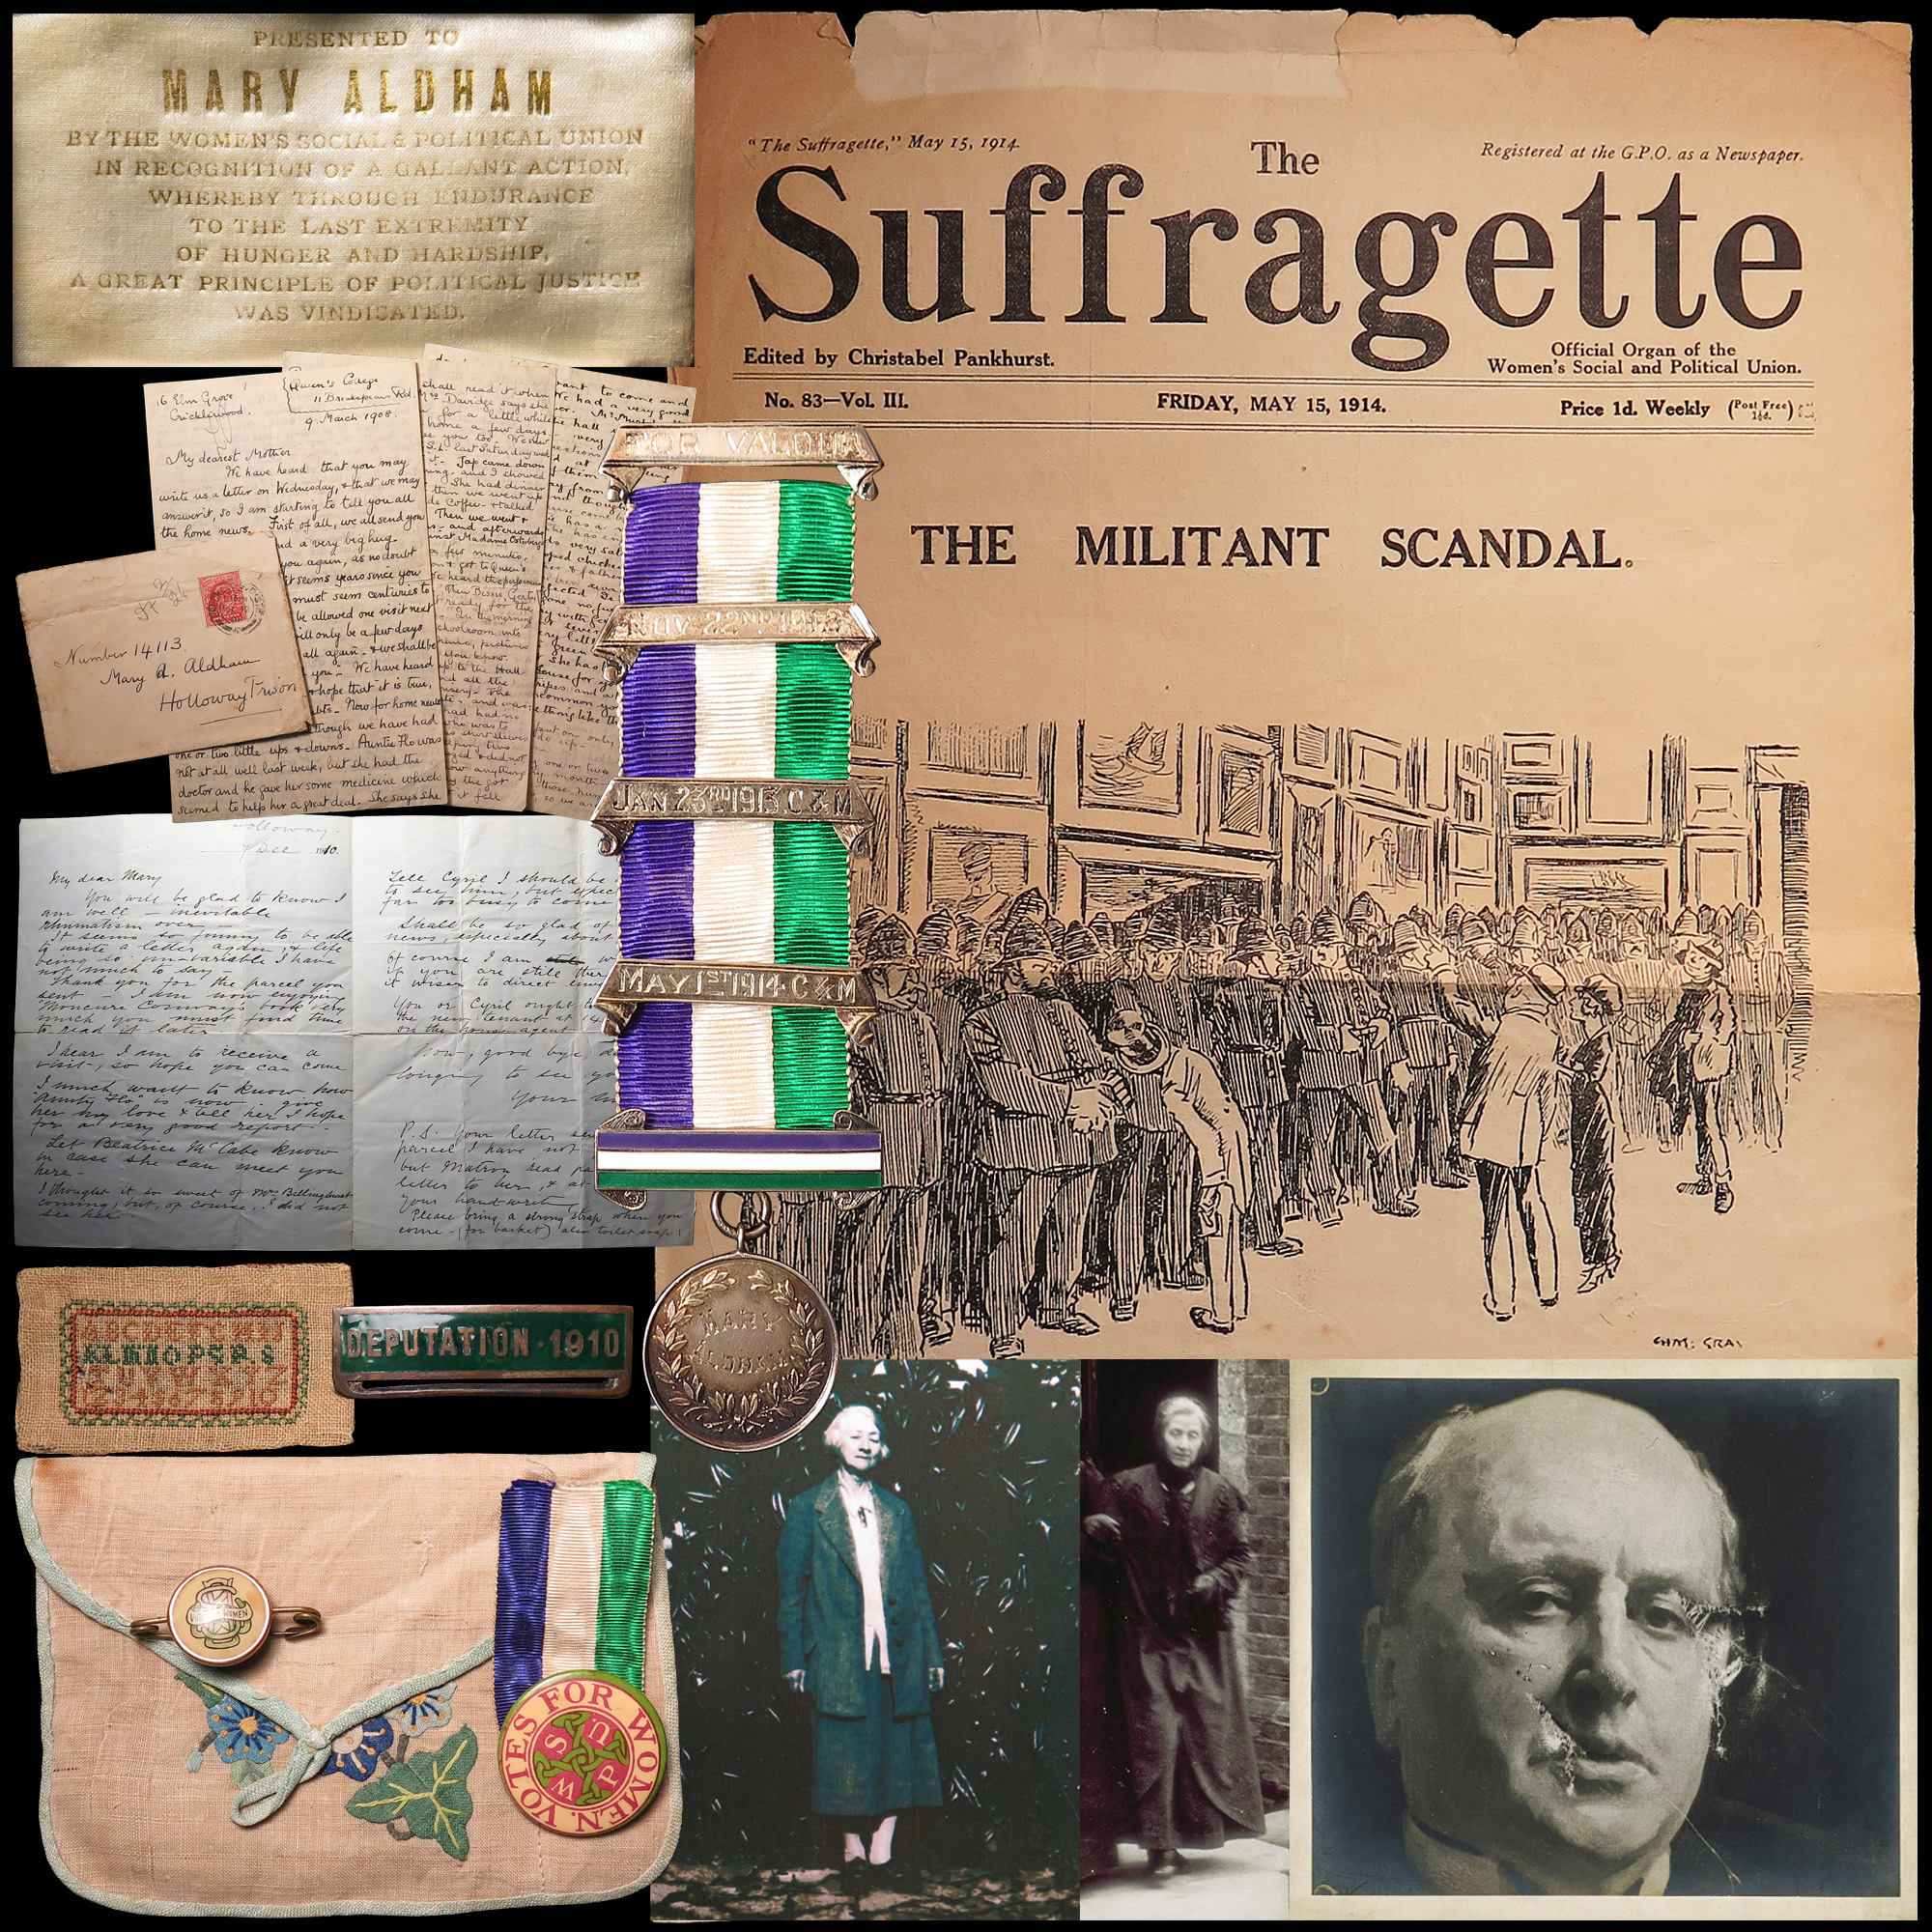 Suffragette Medal with original named fitted case awarded to Mary Aldham. The medal engraved to Mary